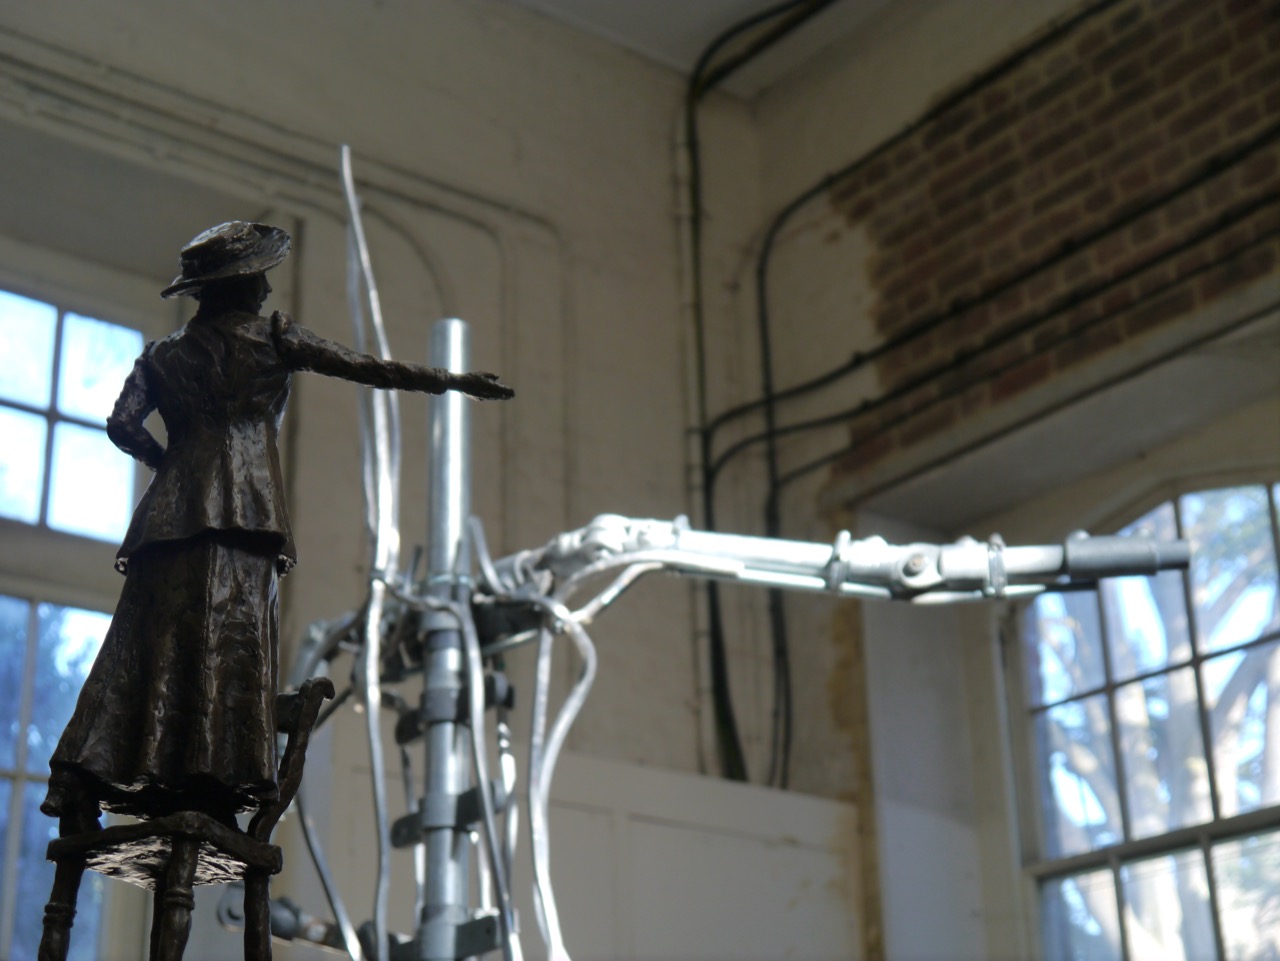 Emmeline armature with maquette - sculpture by Hazel Reeves